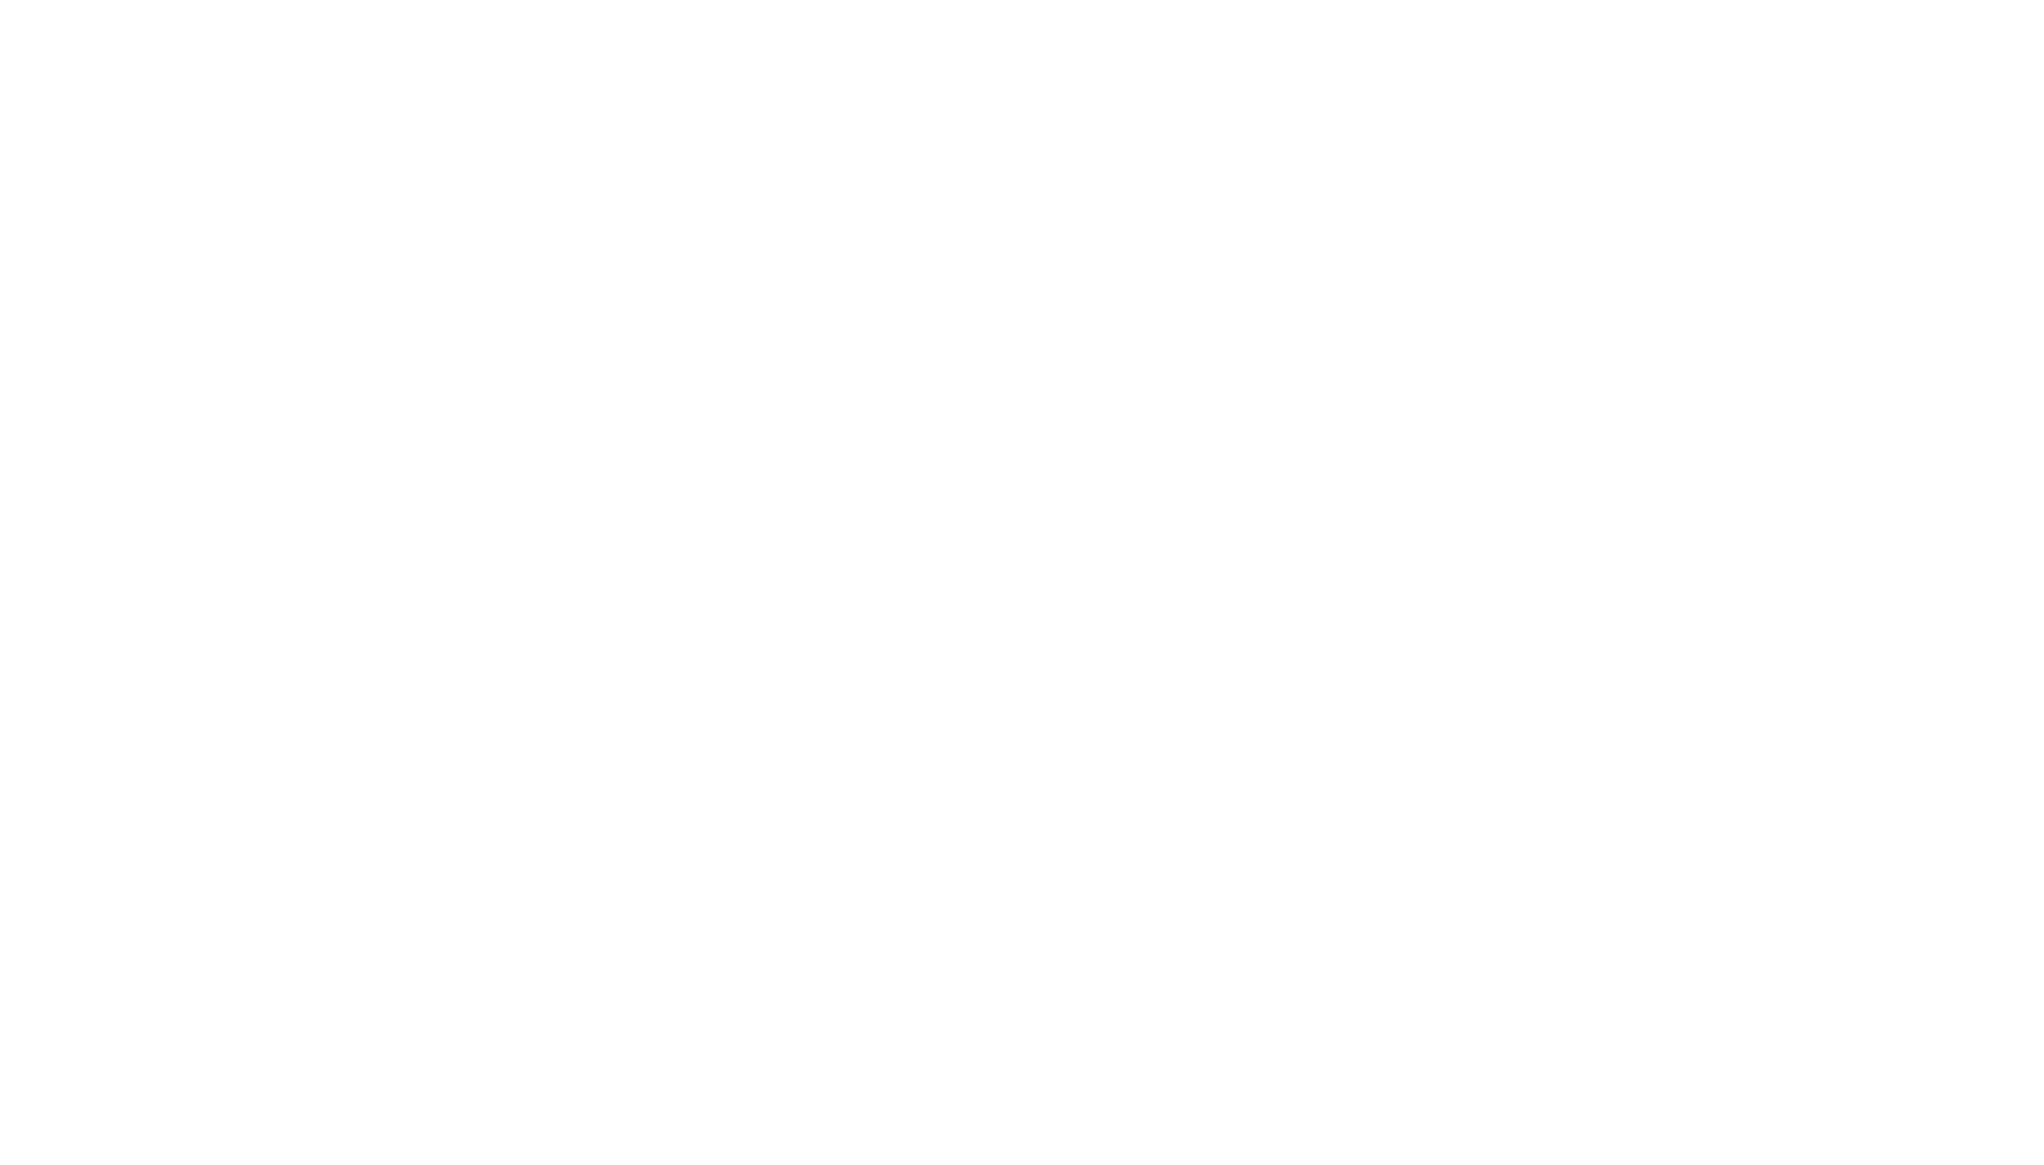 Che: Part Two logo